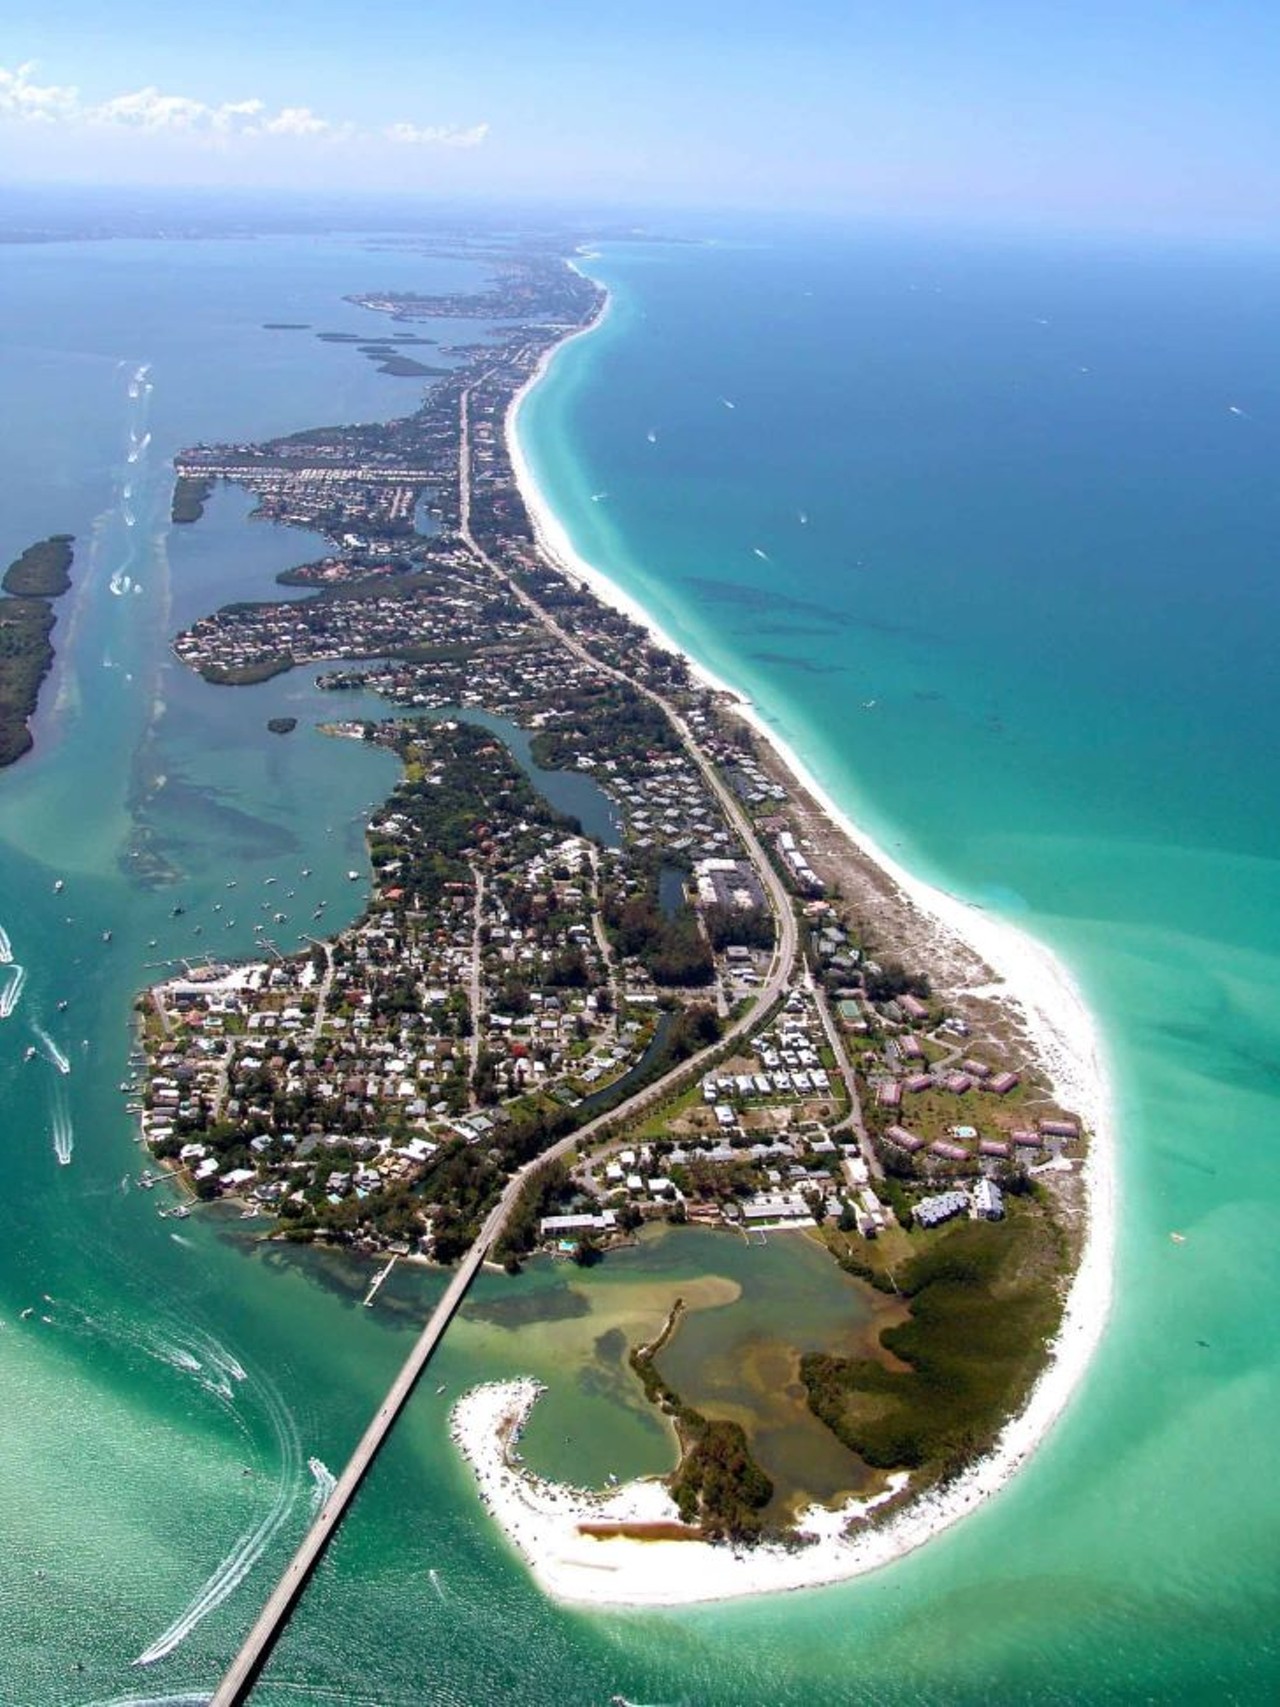 Longboat Key 
3 hours away
Longboat Key&#146;s 12-mile beaches are perfect for relaxing and enjoying the ocean breeze. Check out their kayak tours for possible dolphin or sea turtle sightings. 
Photo via Town of Longboat Key/Facebook